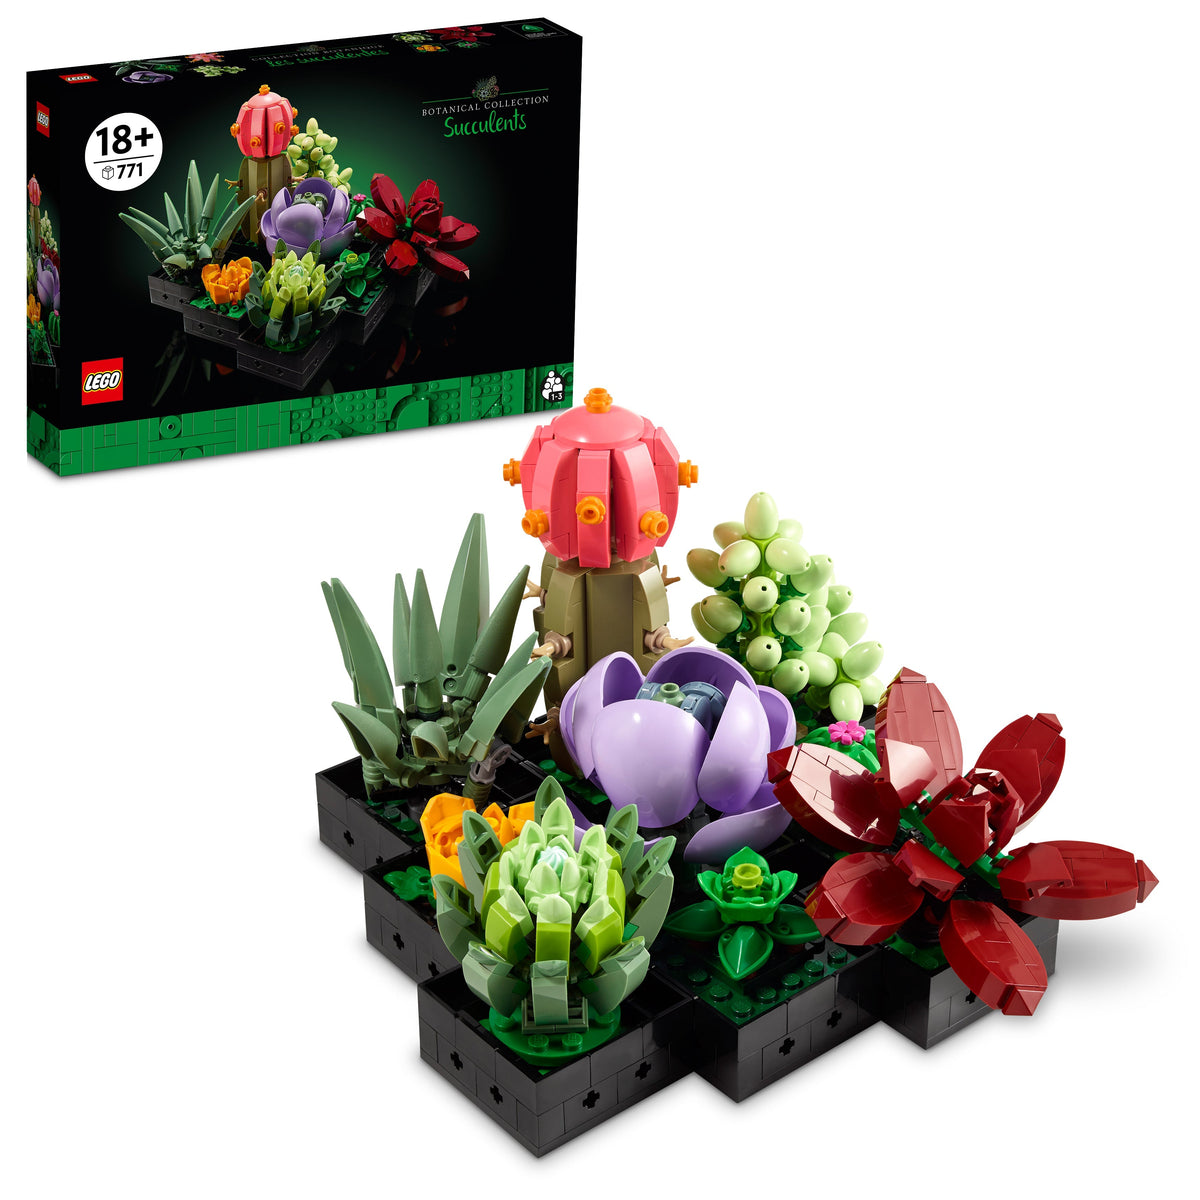 LEGO Toys & Games LEGO Icons Succulents, 10309, Ages 18+, 771 Pieces 673419361620